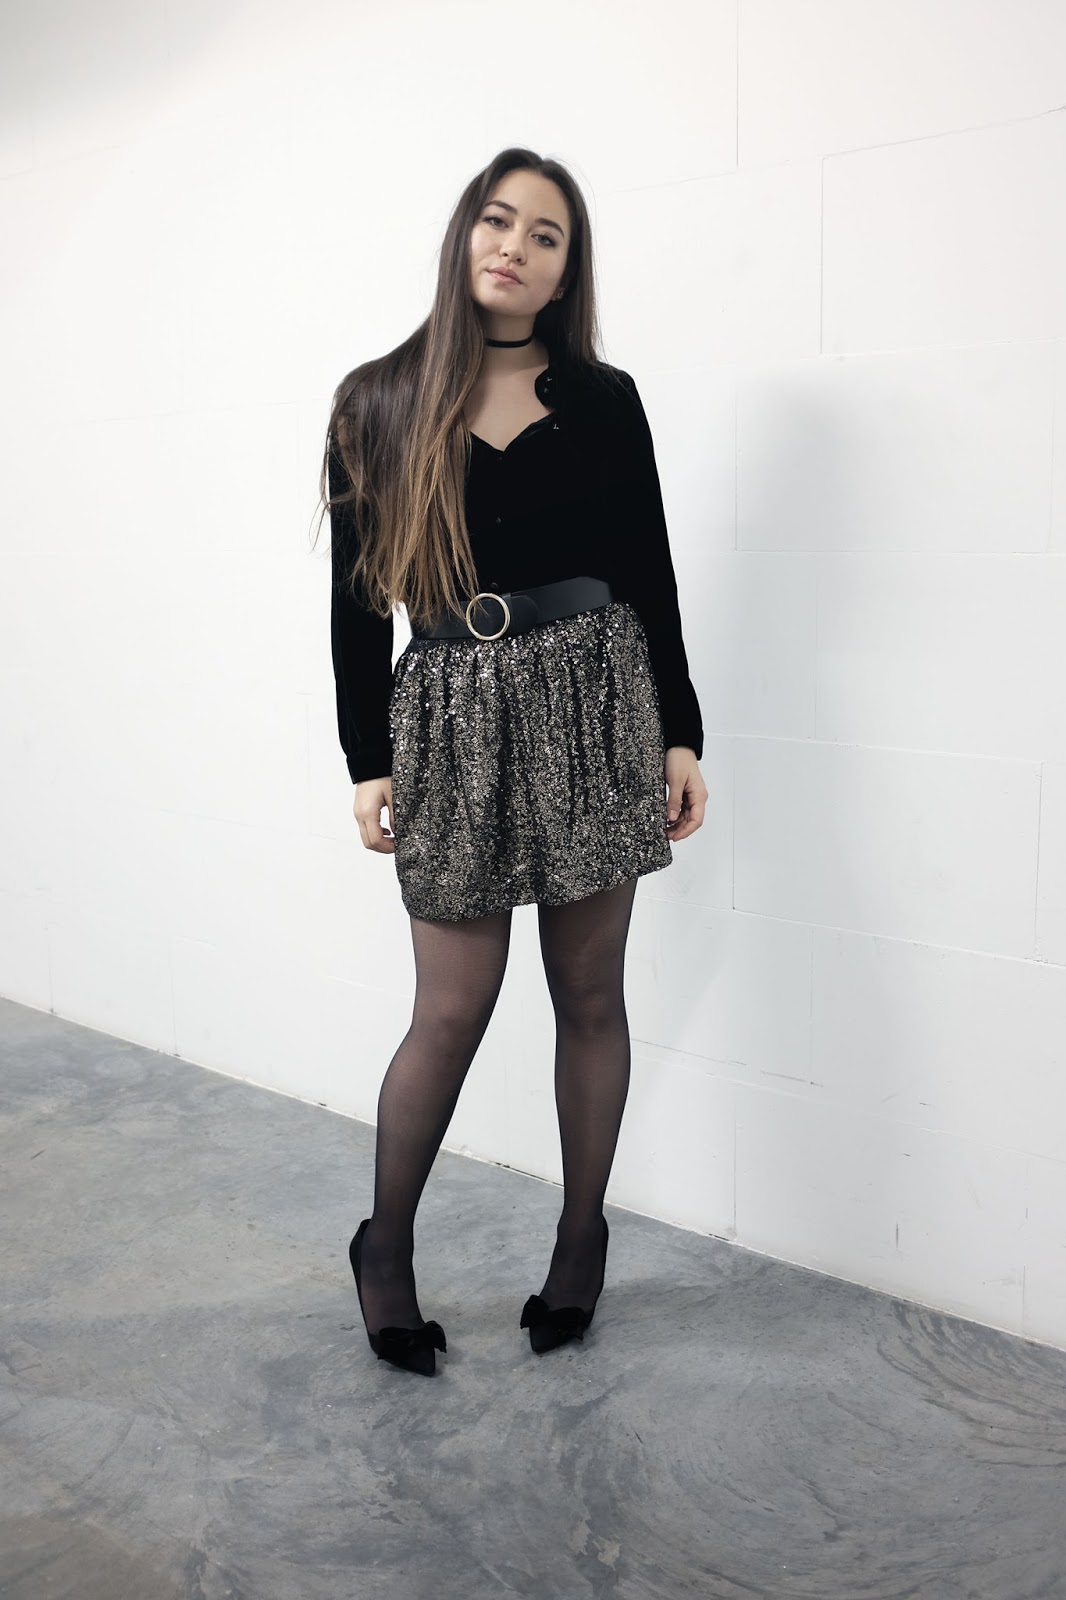 Tights With A Skirt | vlr.eng.br